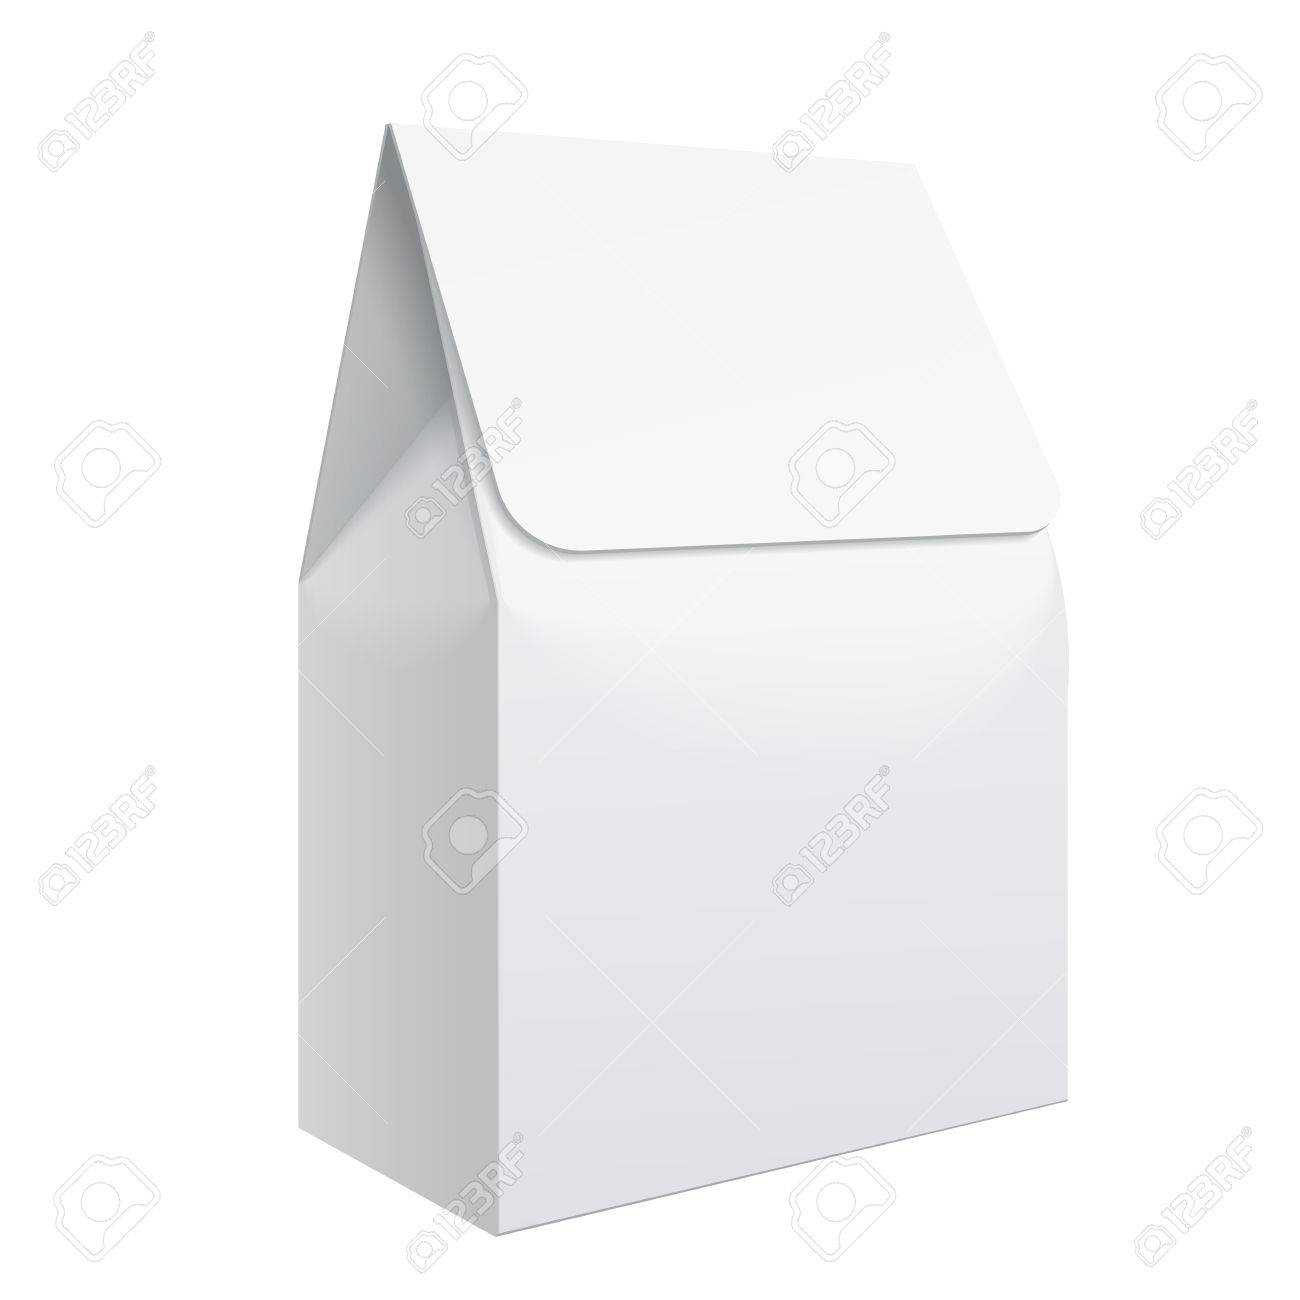 Realistic White Blank Template Packaging For Food. Food Packing.. Within Blank Packaging Templates